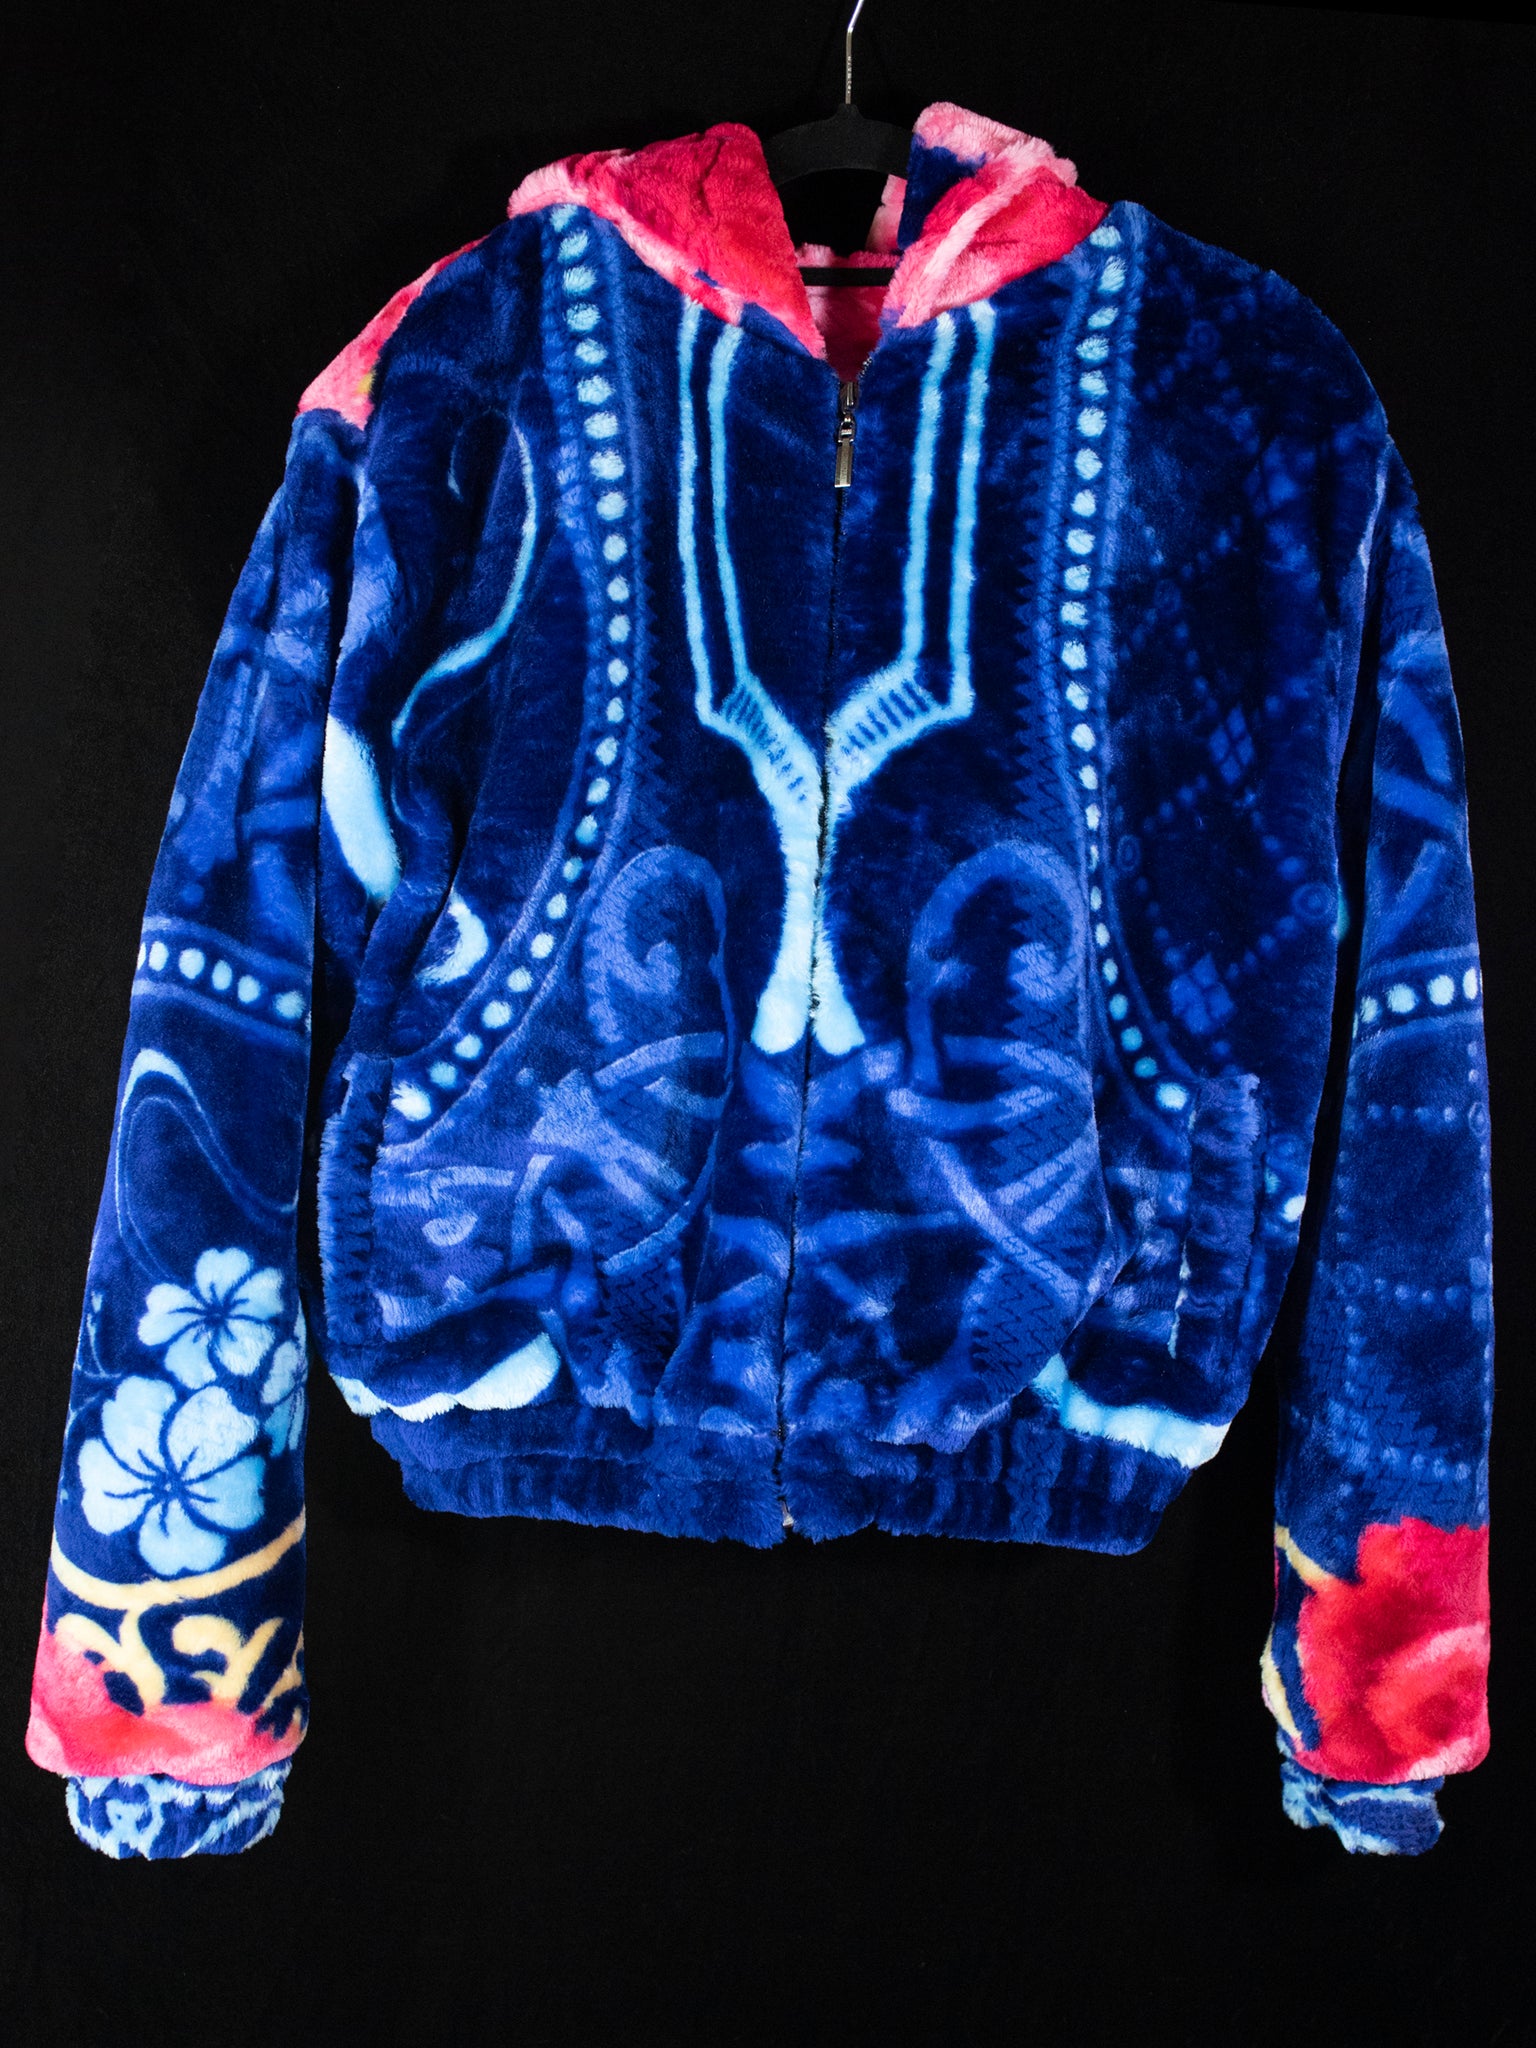 A blue and pink jacket hangs on a hanger against a black backdrop.